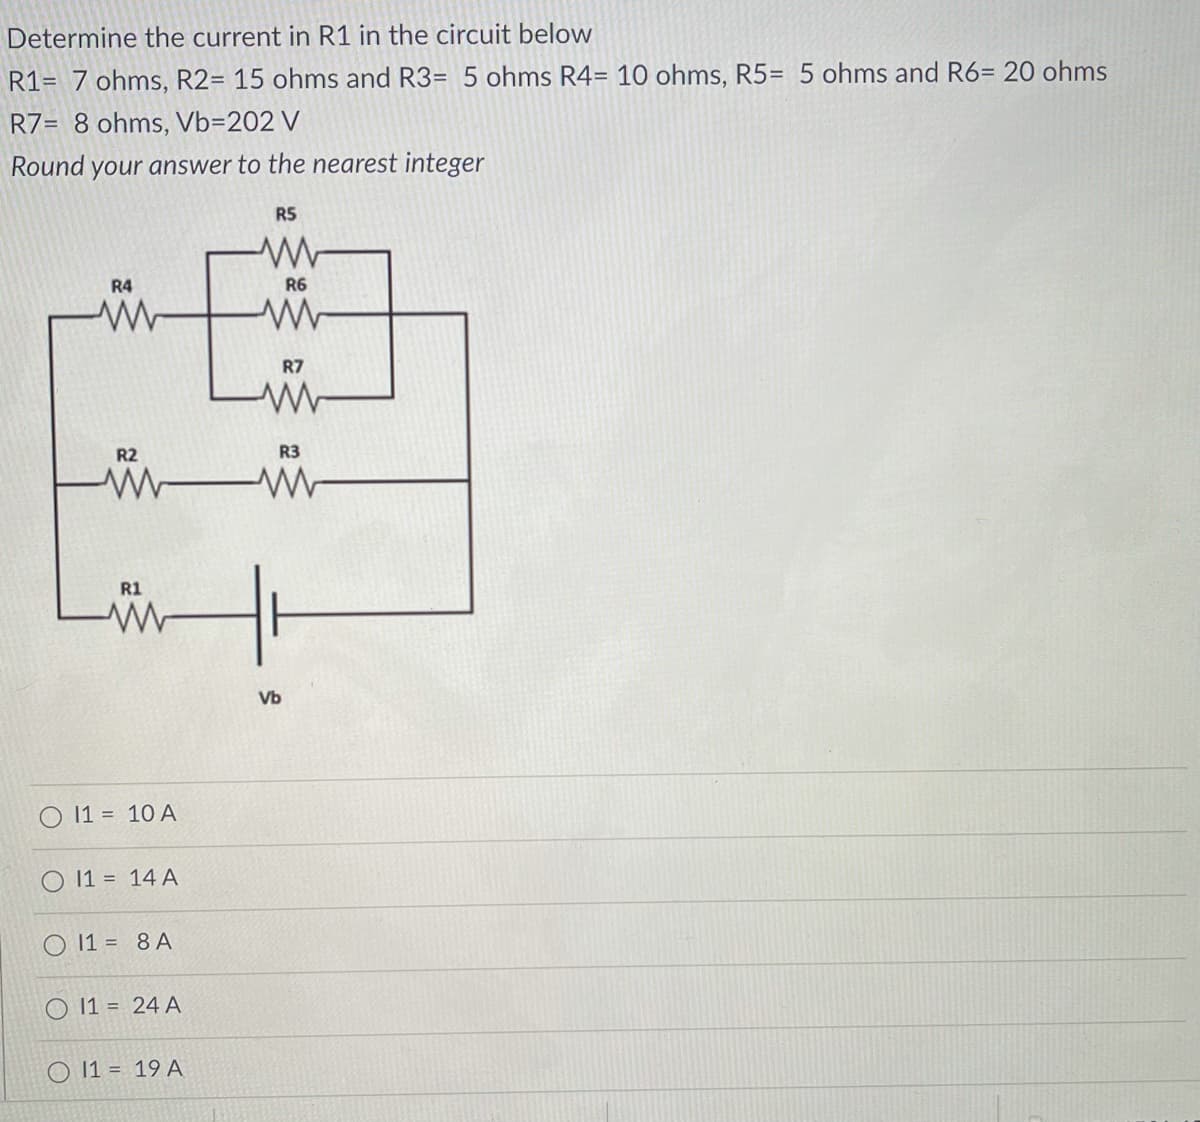 Determine the current in R1 in the circuit below
R1= 7 ohms, R2= 15 ohms and R3= 5 ohms R4= 10 ohms, R5= 5 ohms and R6= 20 ohms
R7= 8 ohms, Vb=202 V
Round your answer to the nearest integer
R5
R4
R6
R7
R2
R3
R1
Vb
O 11 = 10 A
11 = 14 A
O 11 = 8 A
11 = 24 A
O 11 = 19 A
